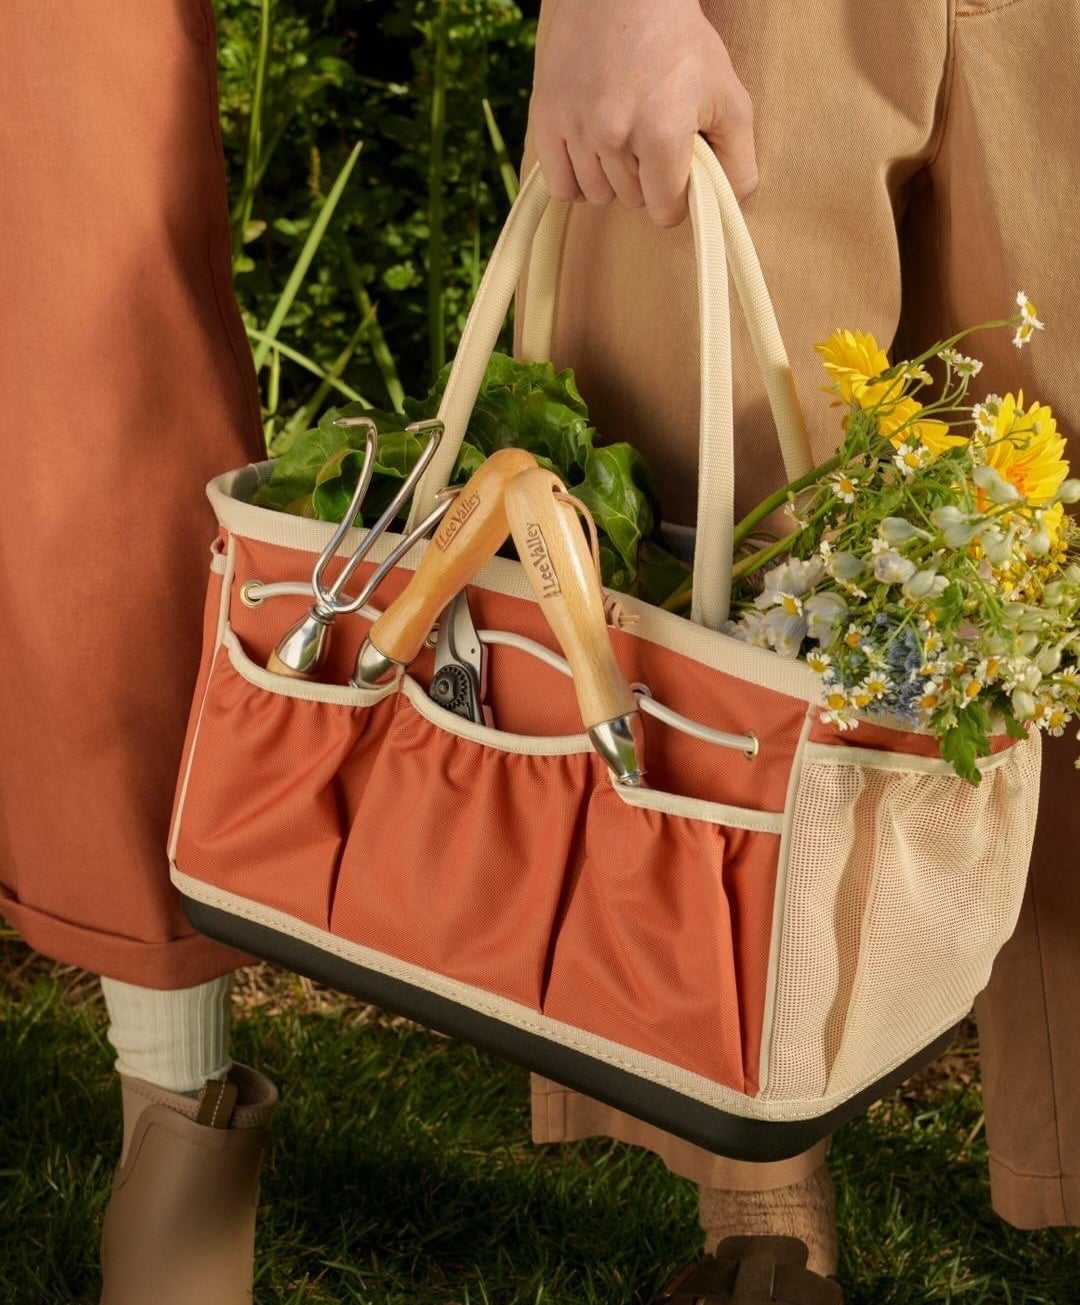 A person holding the gardening bag